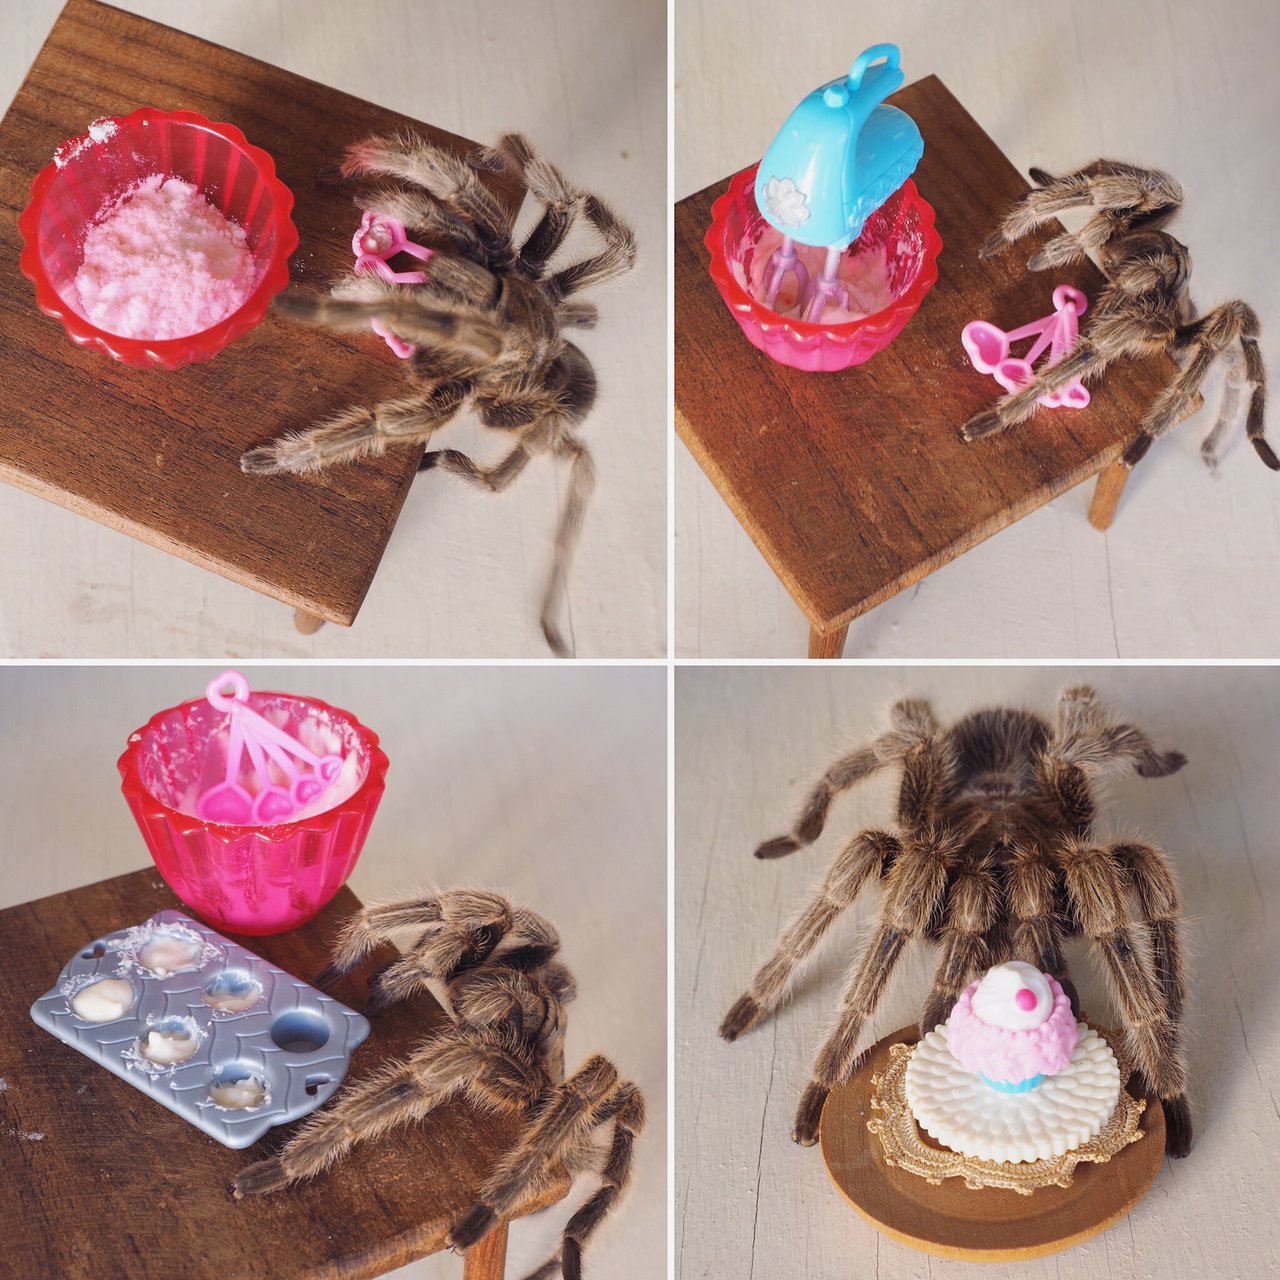 Spider bakes a cake